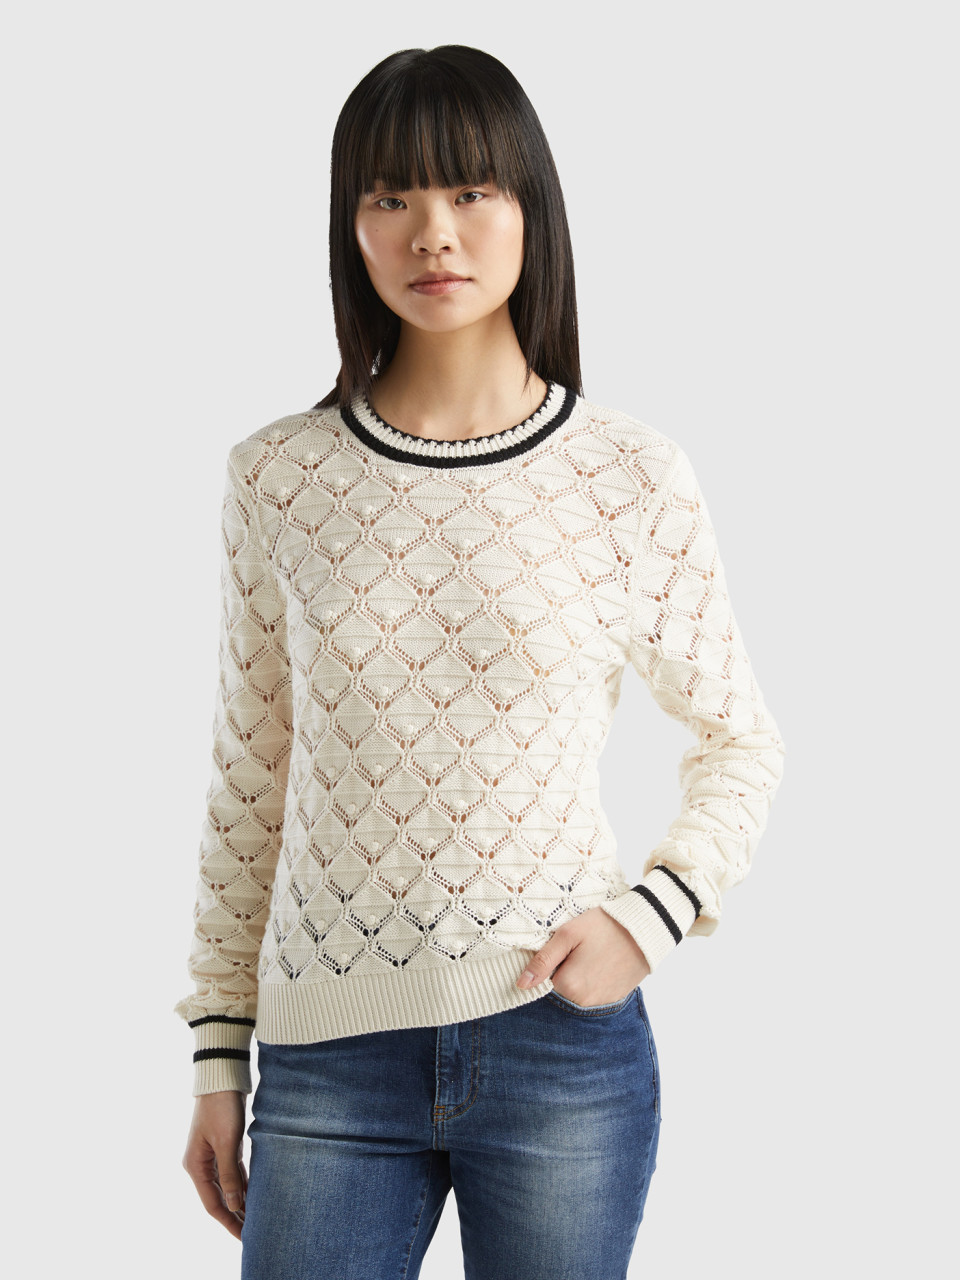 Benetton, Perforated Sweater In Pure Cotton, Creamy White, Women